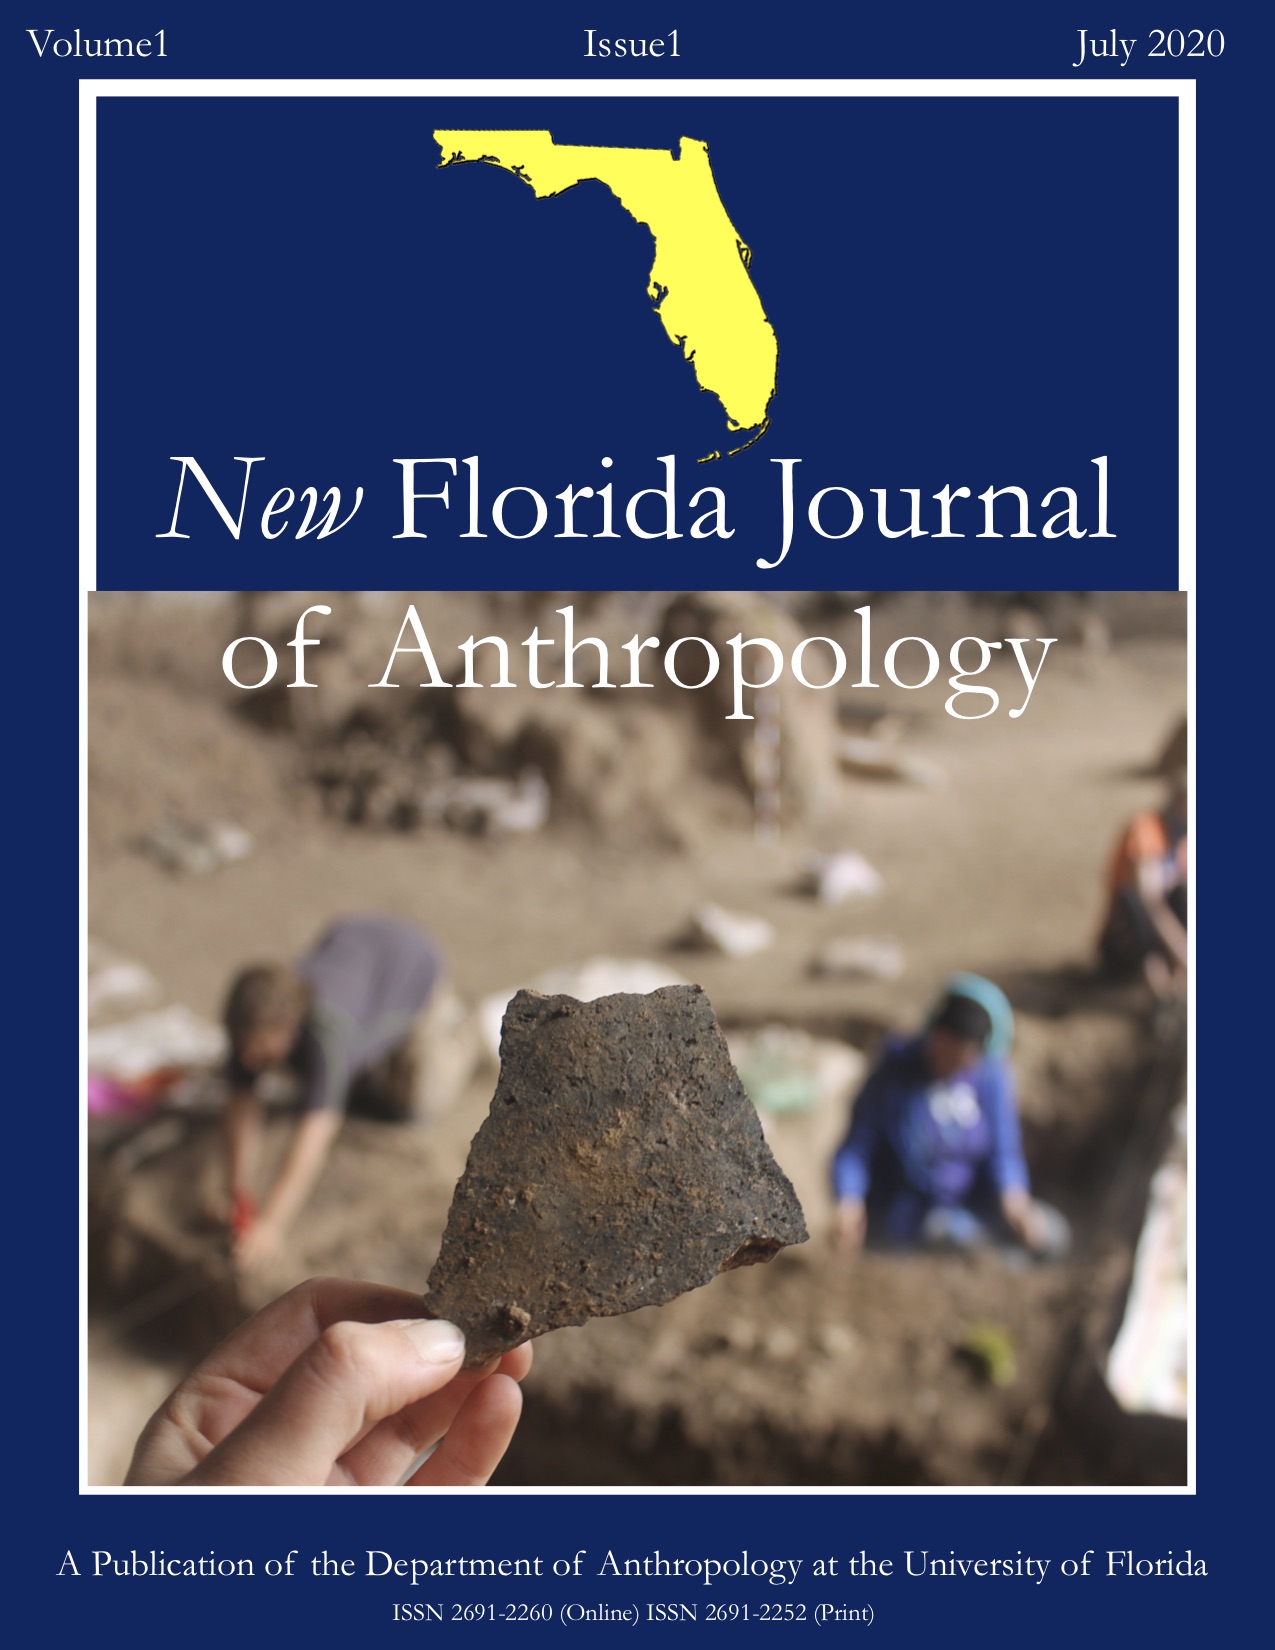 New Florida Journal of Anthropology (NFJA) cover image Volume 1 Issue 1. Depicts an image by Ayelen Garcia-Rudnik of an artifact from the Mochena Borago archeological site.